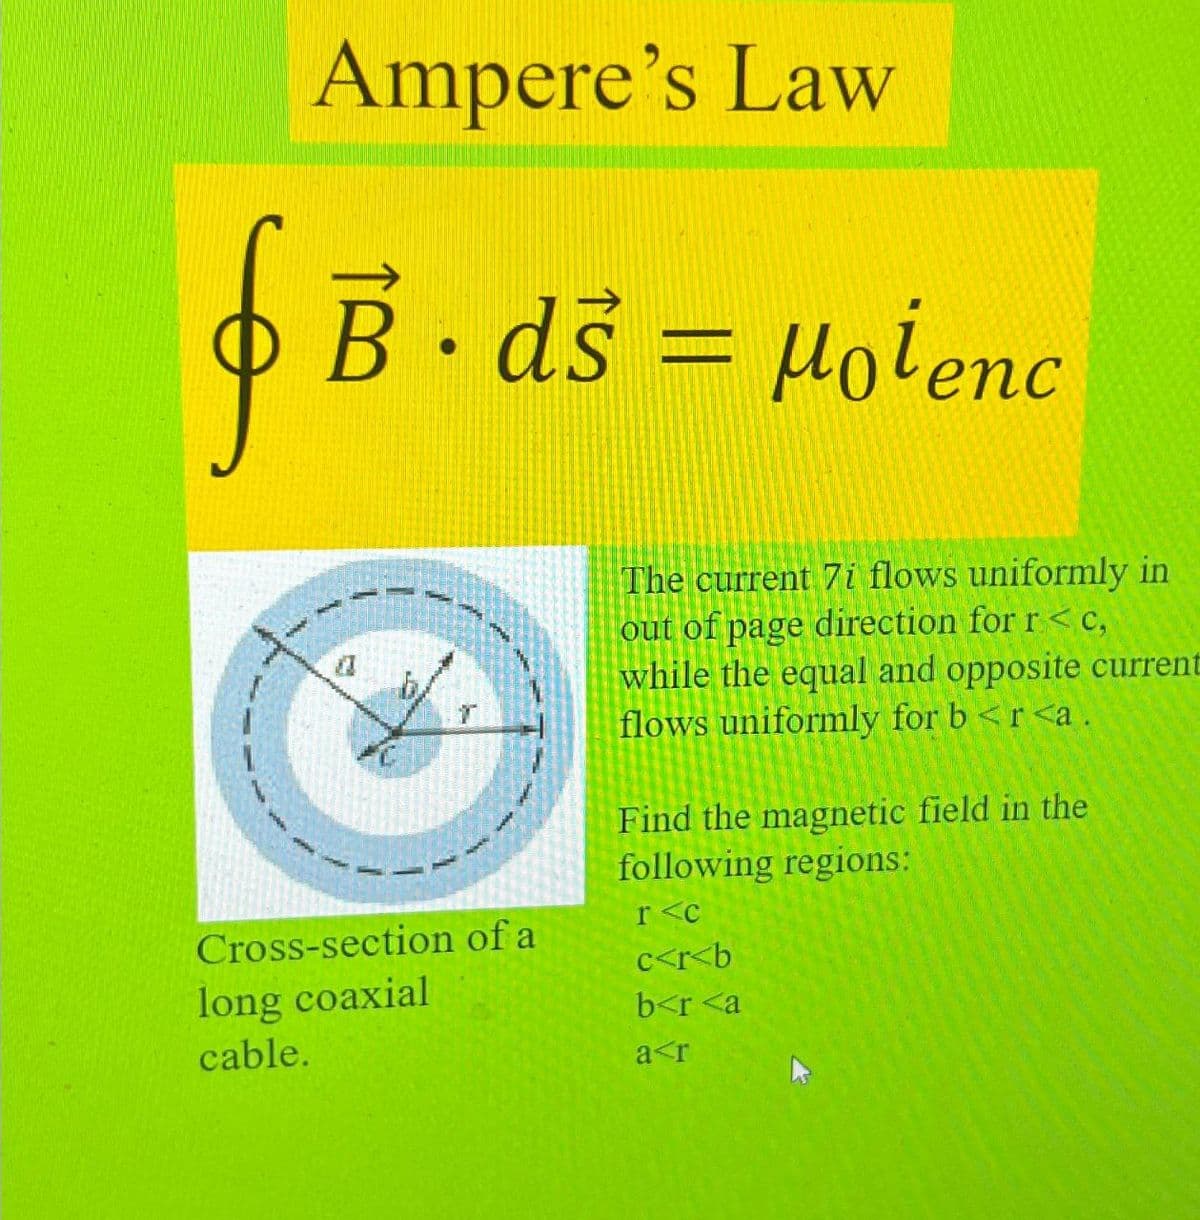 Ampere's Law
ε B.
B. ds = μoienc
Cross-section of a
long coaxial
cable.
The current 7i flows uniformly in
out of page direction for r<c,
while the equal and opposite current
flows uniformly for b<r<a.
Find the magnetic field in the
following regions:
r<c
c<r<b
b<r<a
a<r